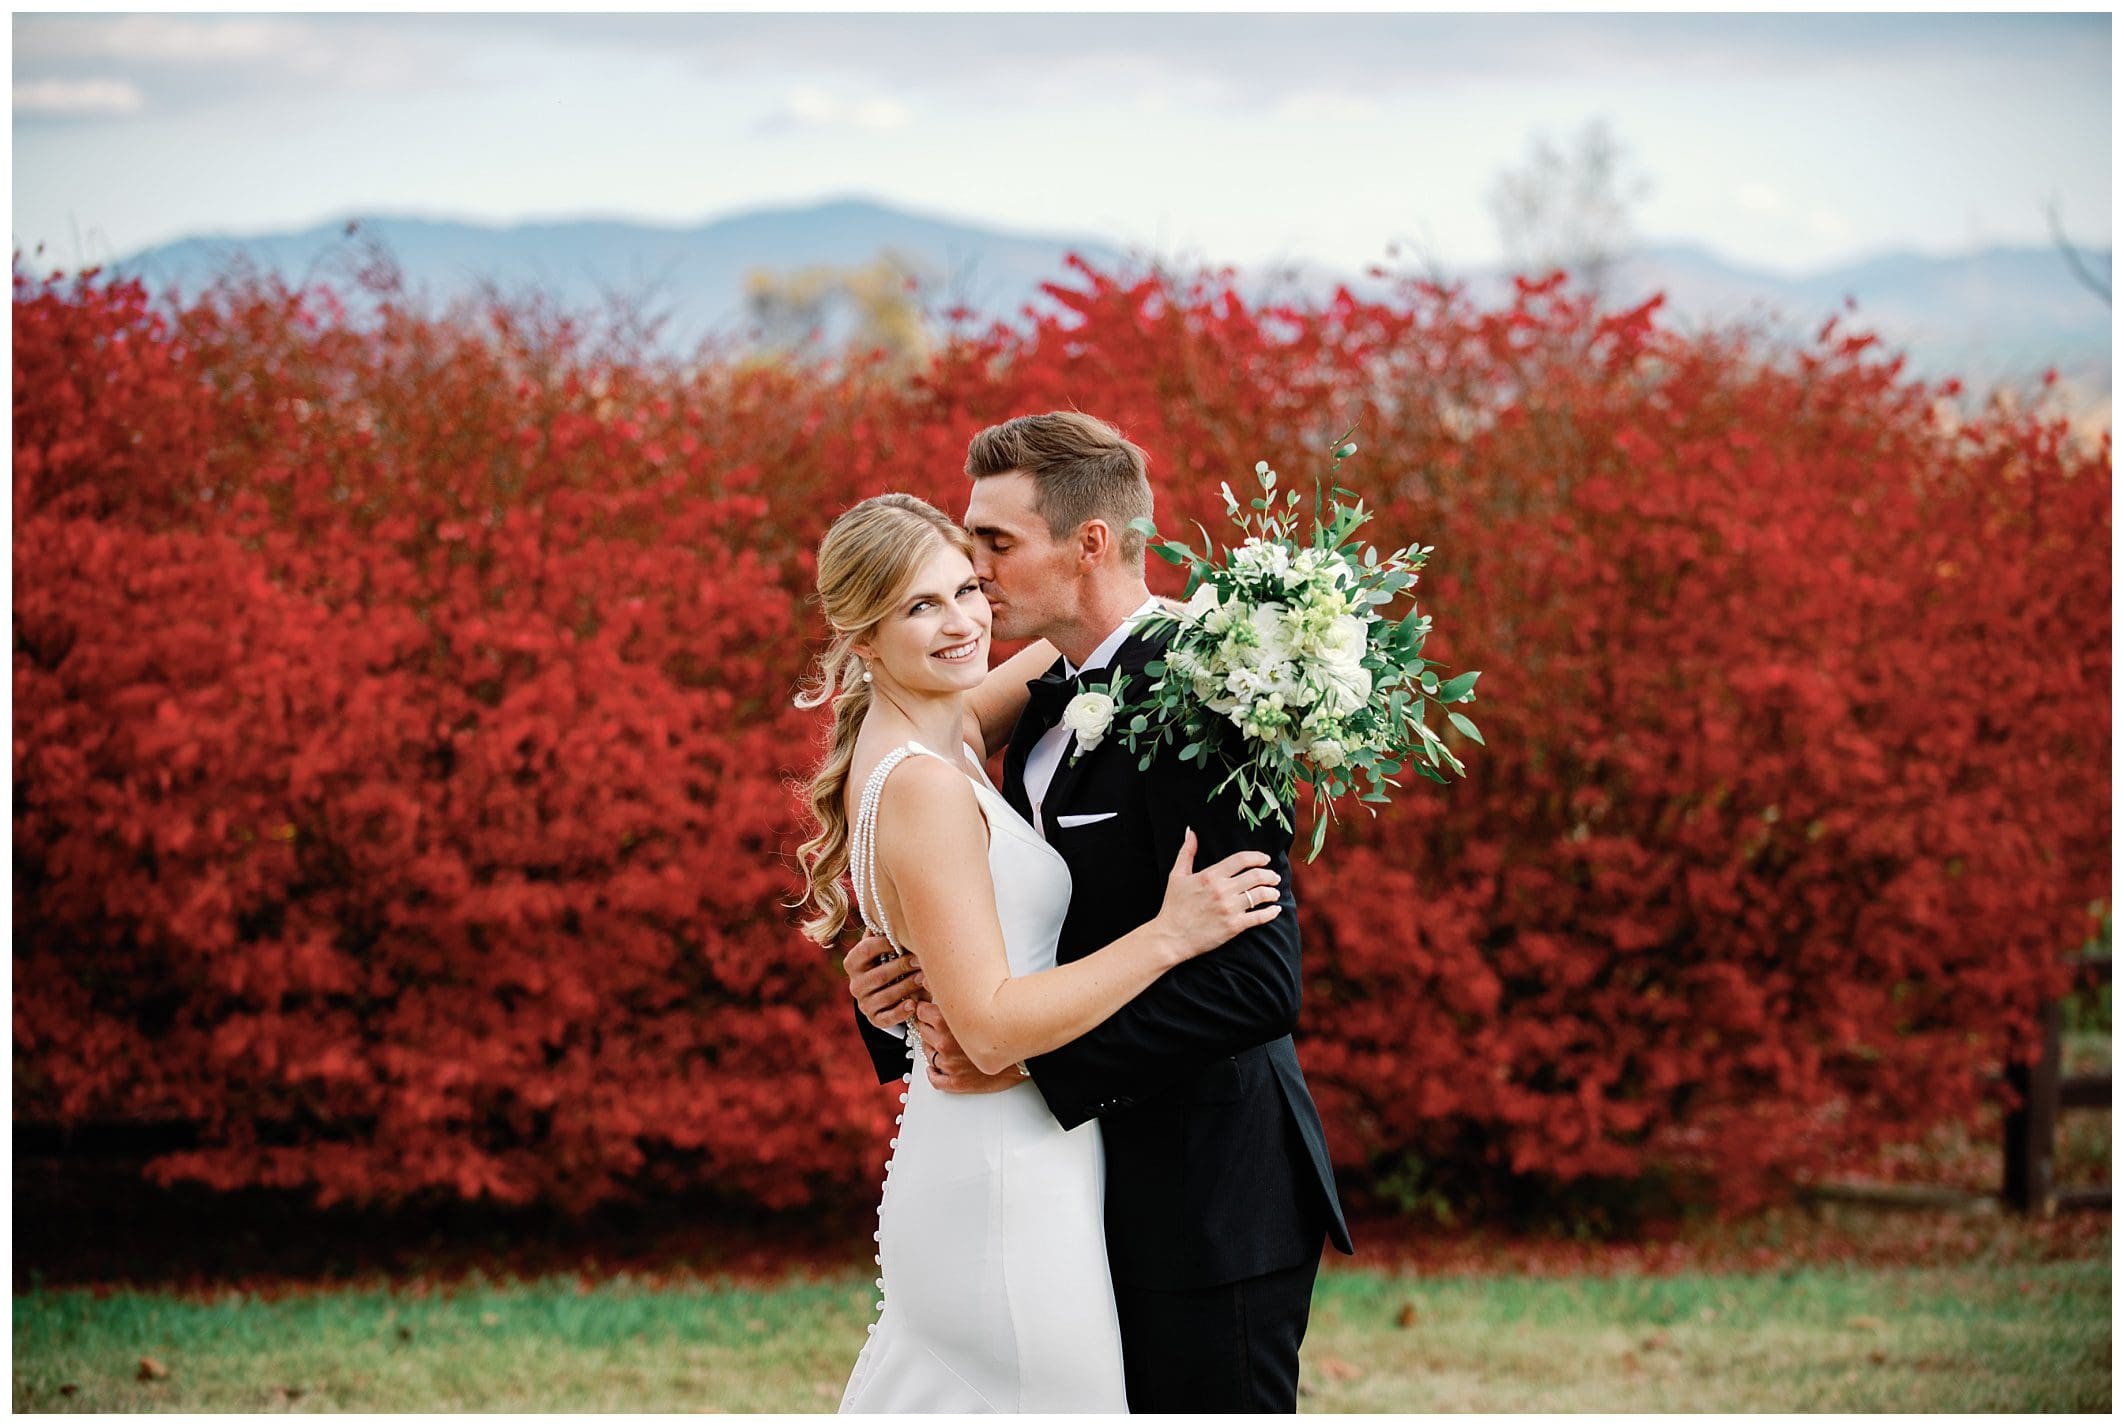 A bride and groom embrace in front of red bushes during their fall wedding at the Crest Center.